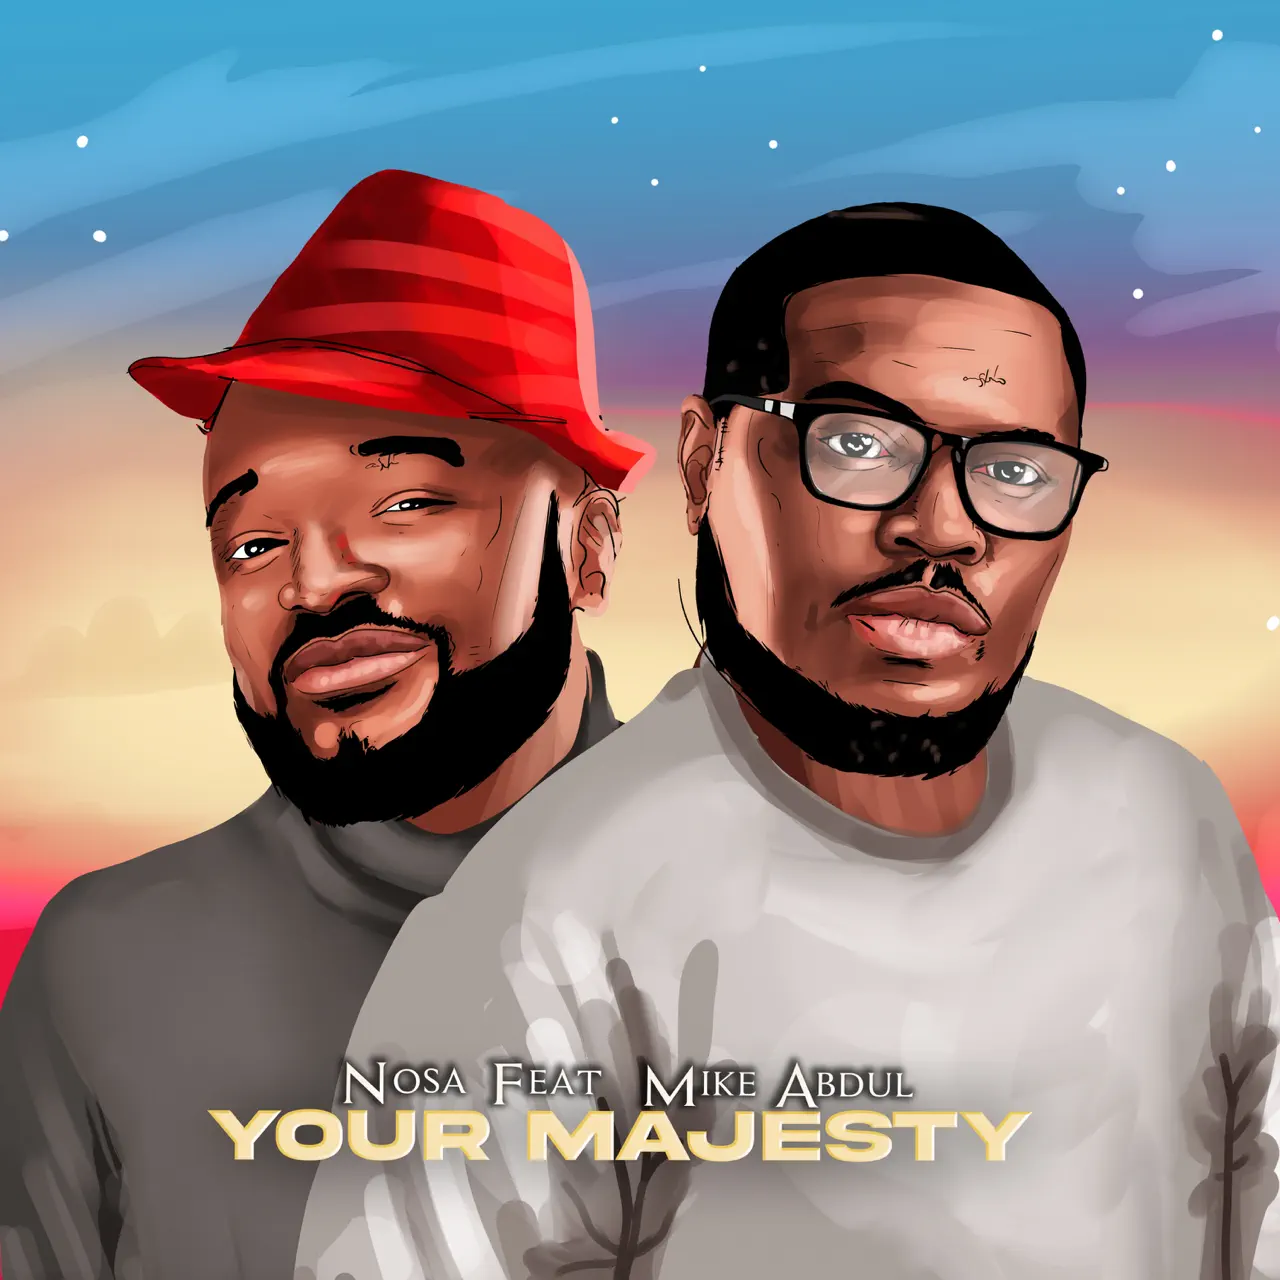 Nosa-Mike Abdul-Your Majesty